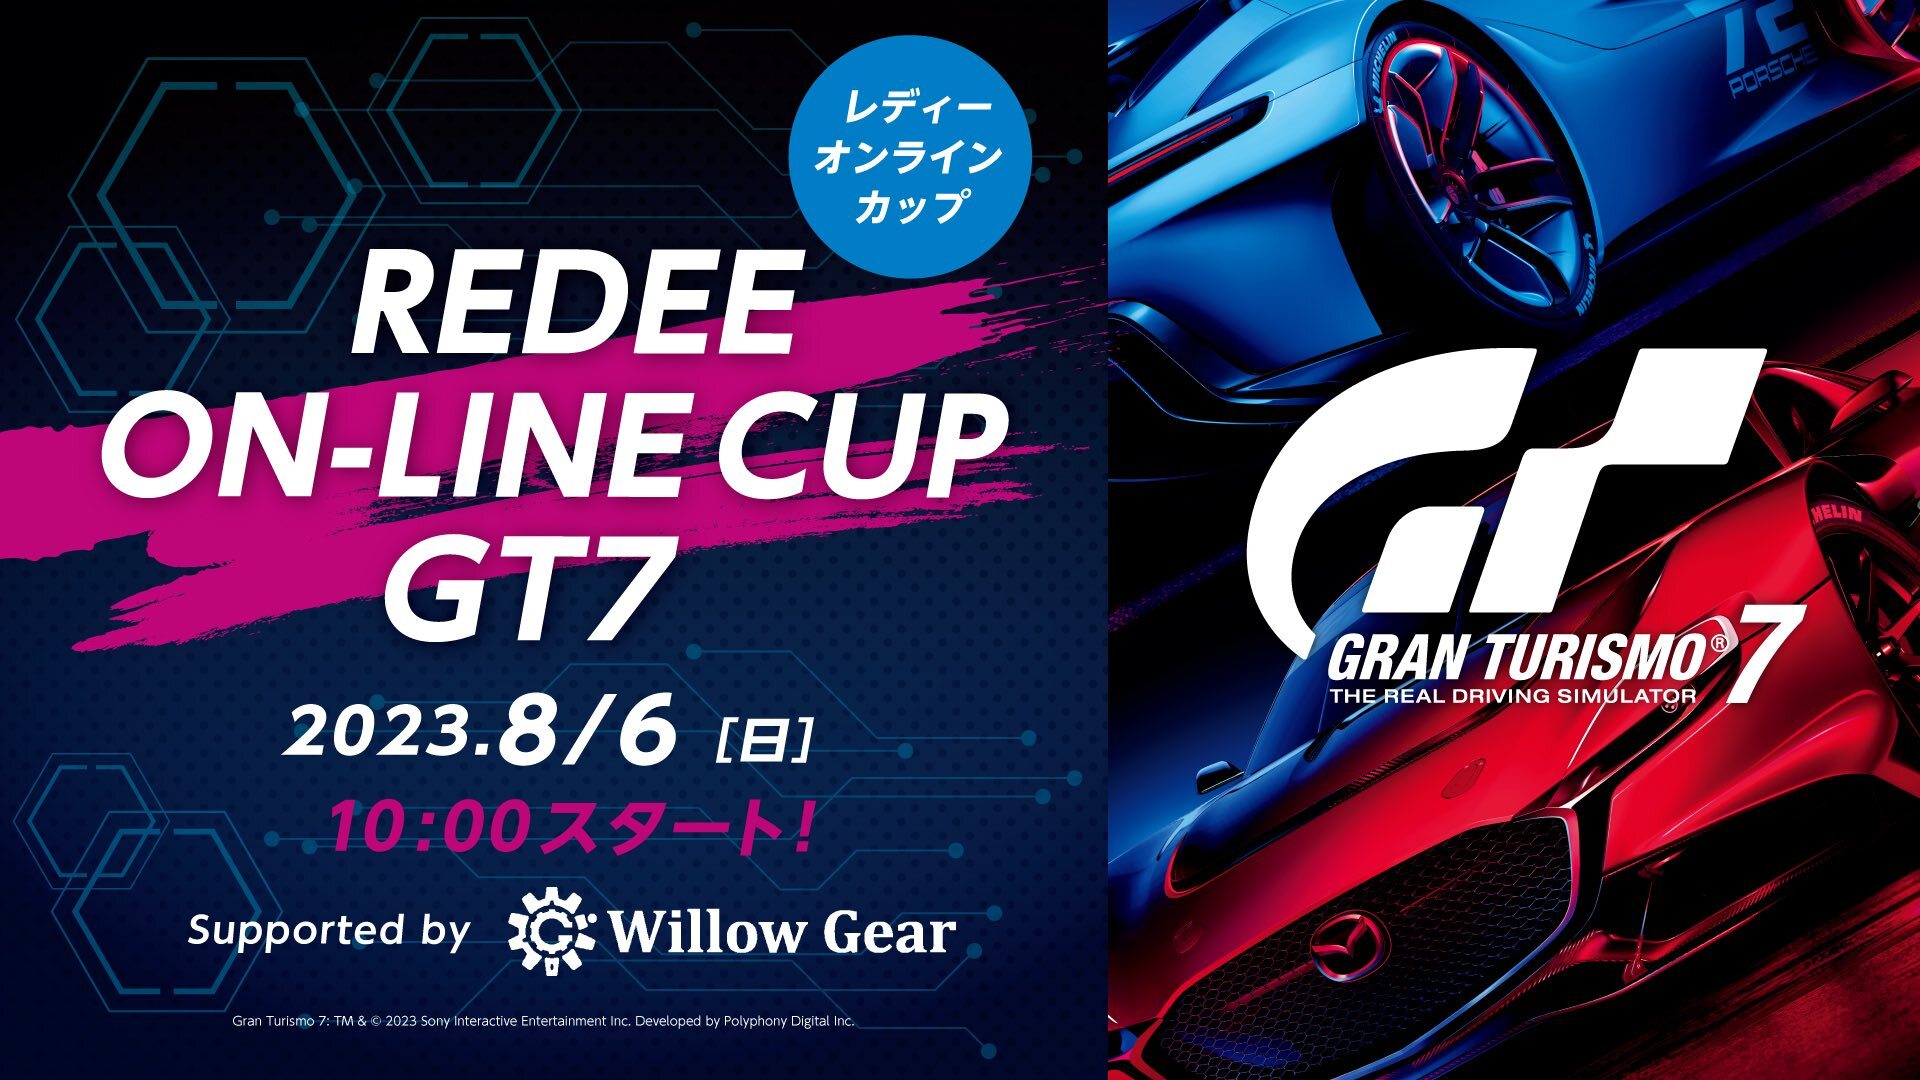 REDEE株式会社主催オンラインeスポーツ大会『REDEE ONLINE CUP GT7 supported by Willow Gear』を開催【イベントレポート】